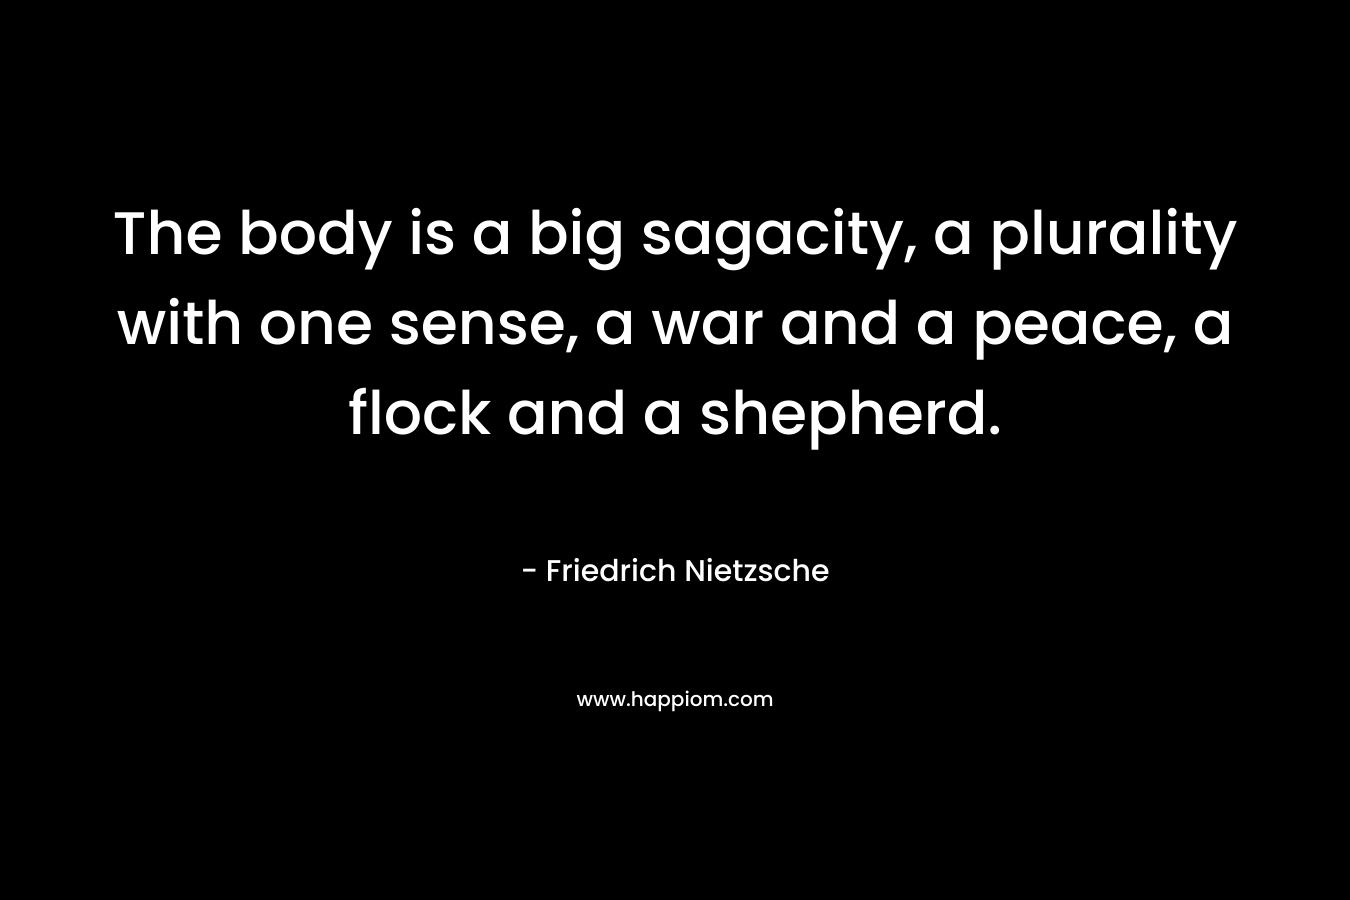 The body is a big sagacity, a plurality with one sense, a war and a peace, a flock and a shepherd.